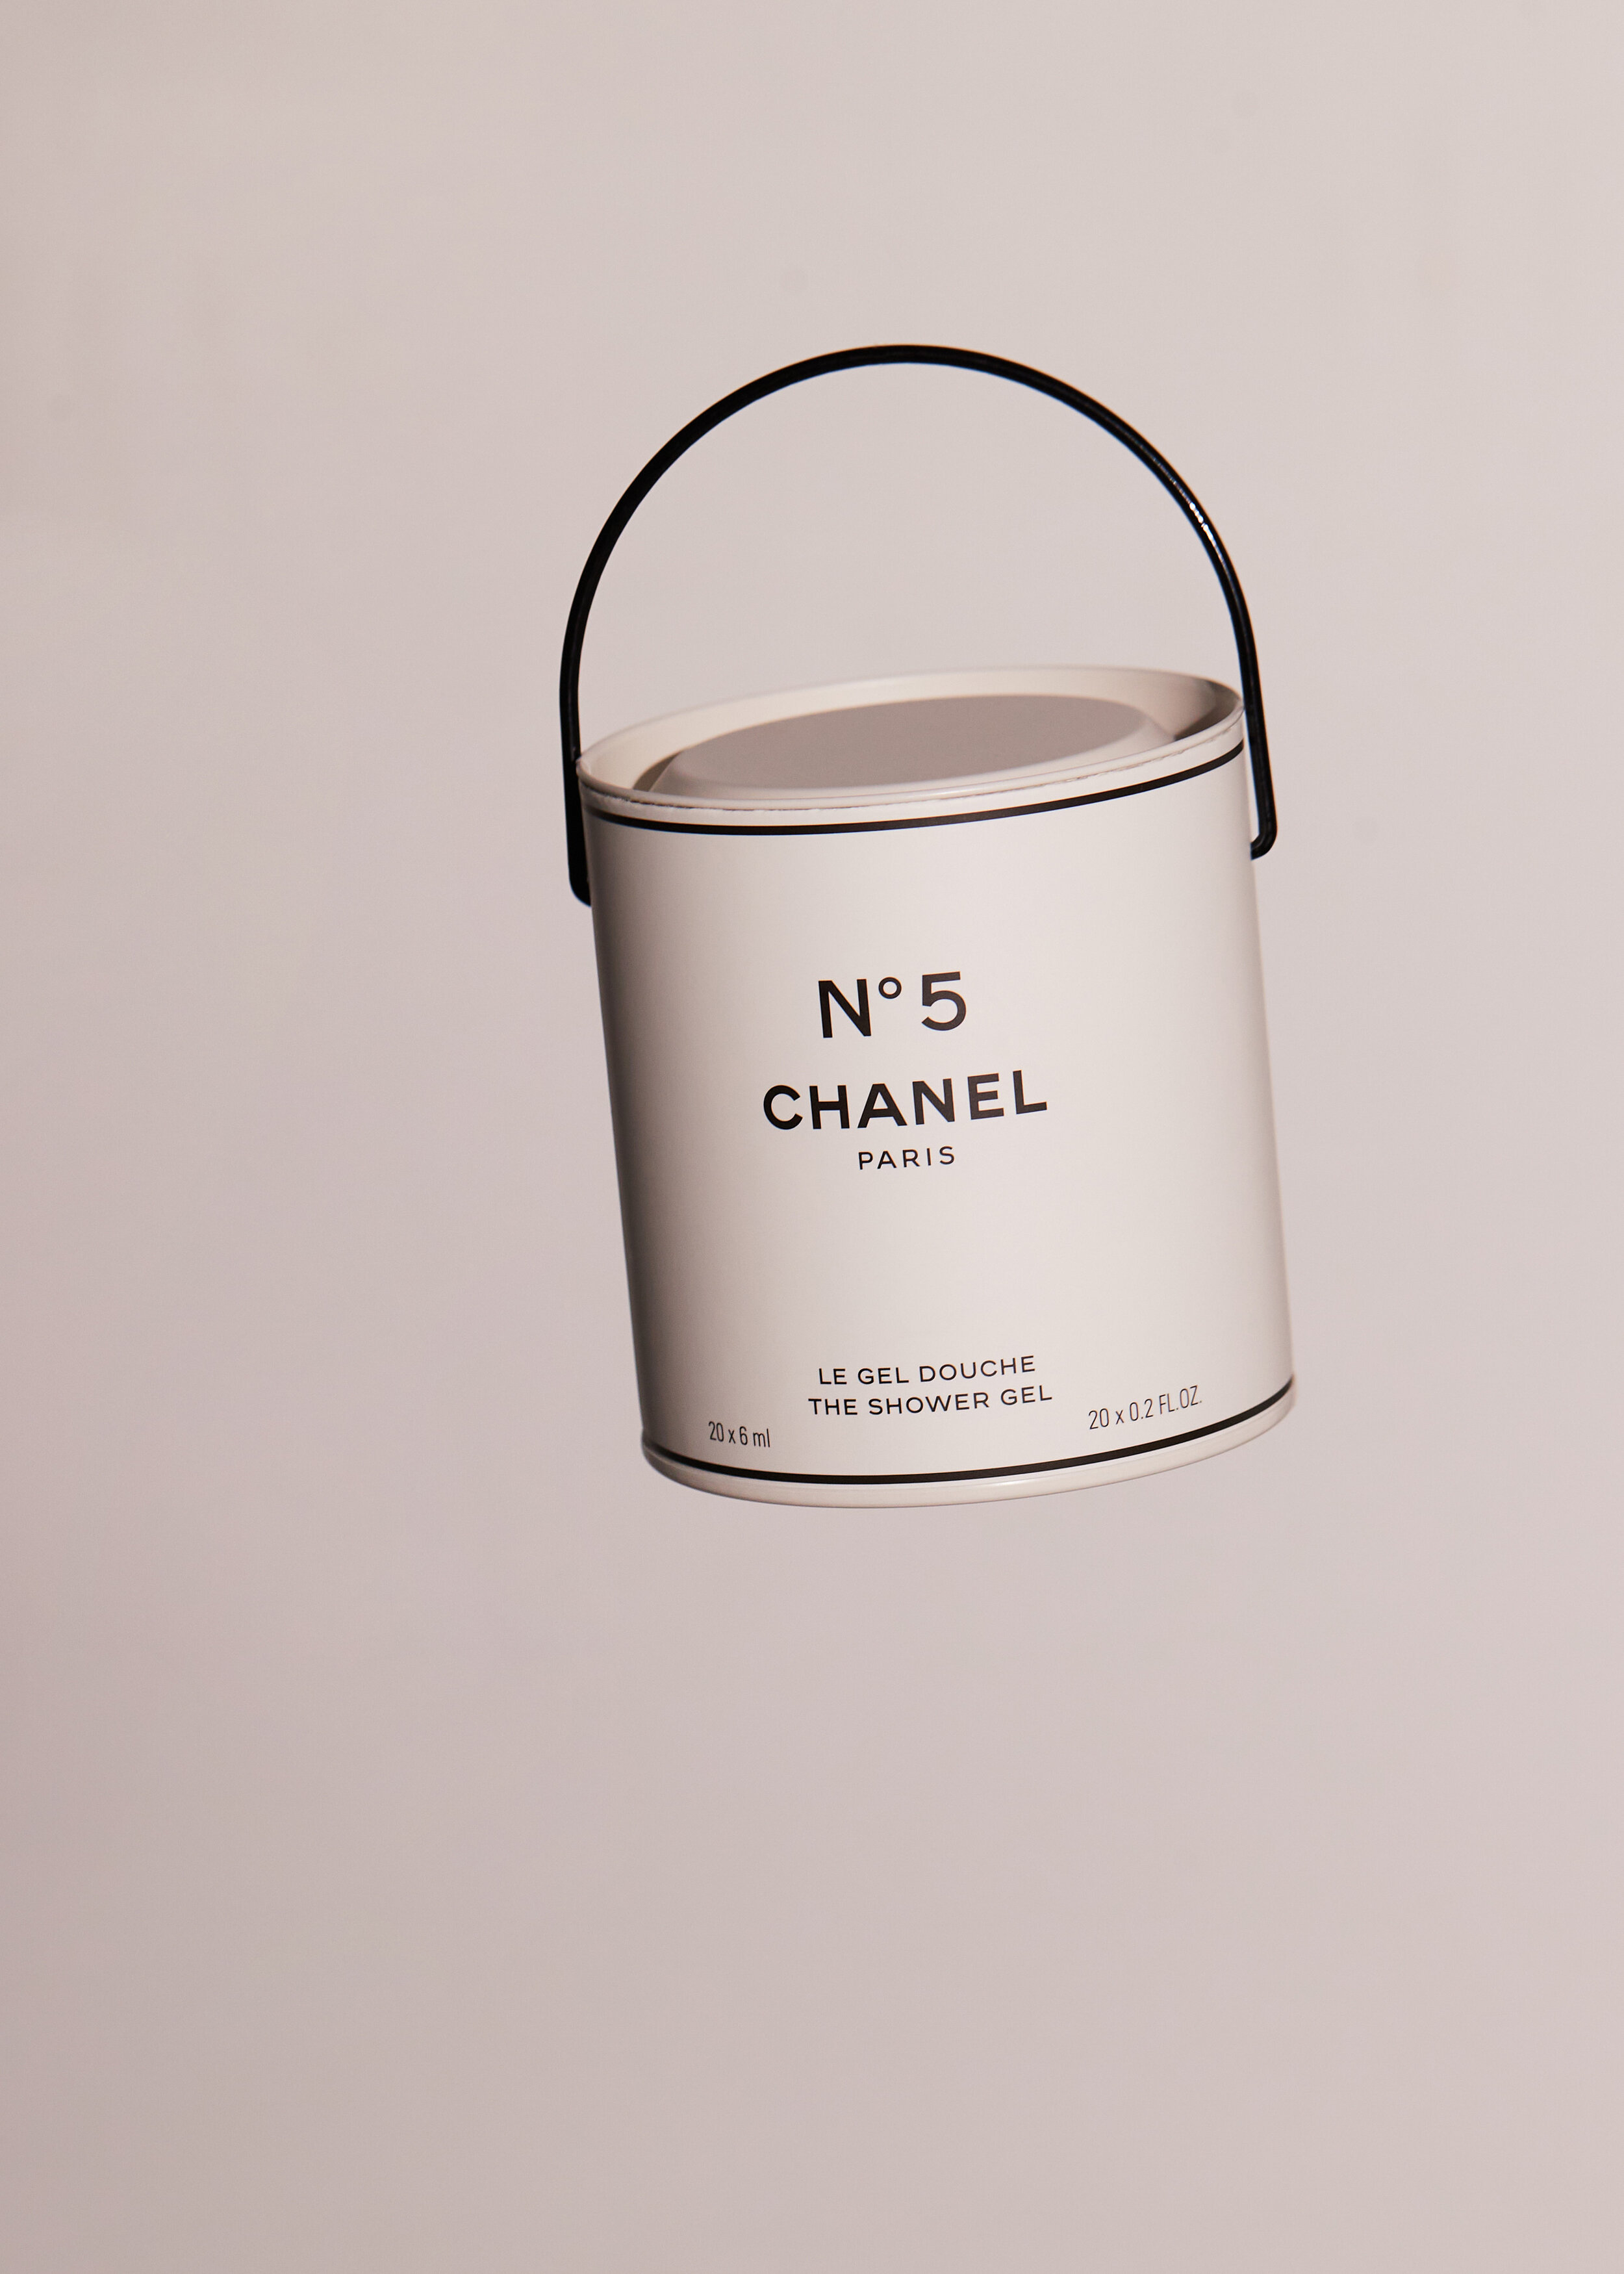 COPY - CHANEL Factory No. 5 The Shower Gel